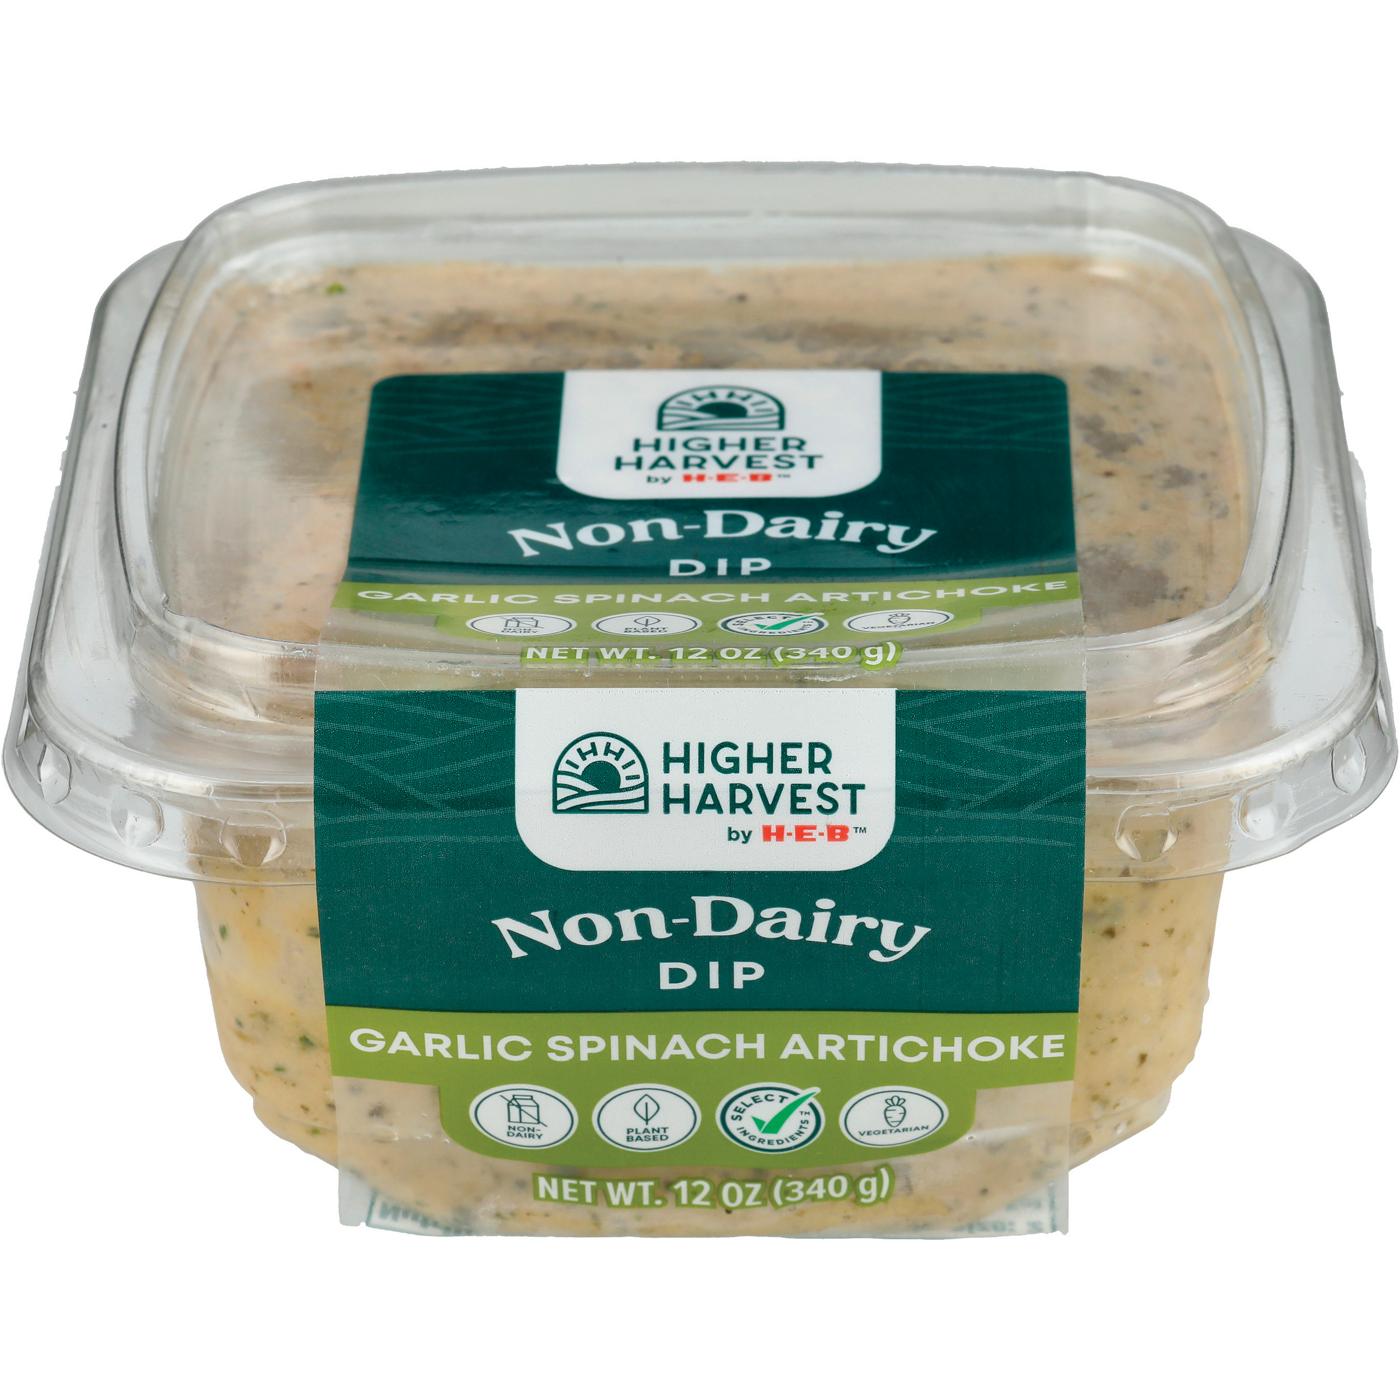 Higher Harvest by H-E-B Non-Dairy Dip – Garlic Spinach Artichoke; image 2 of 3